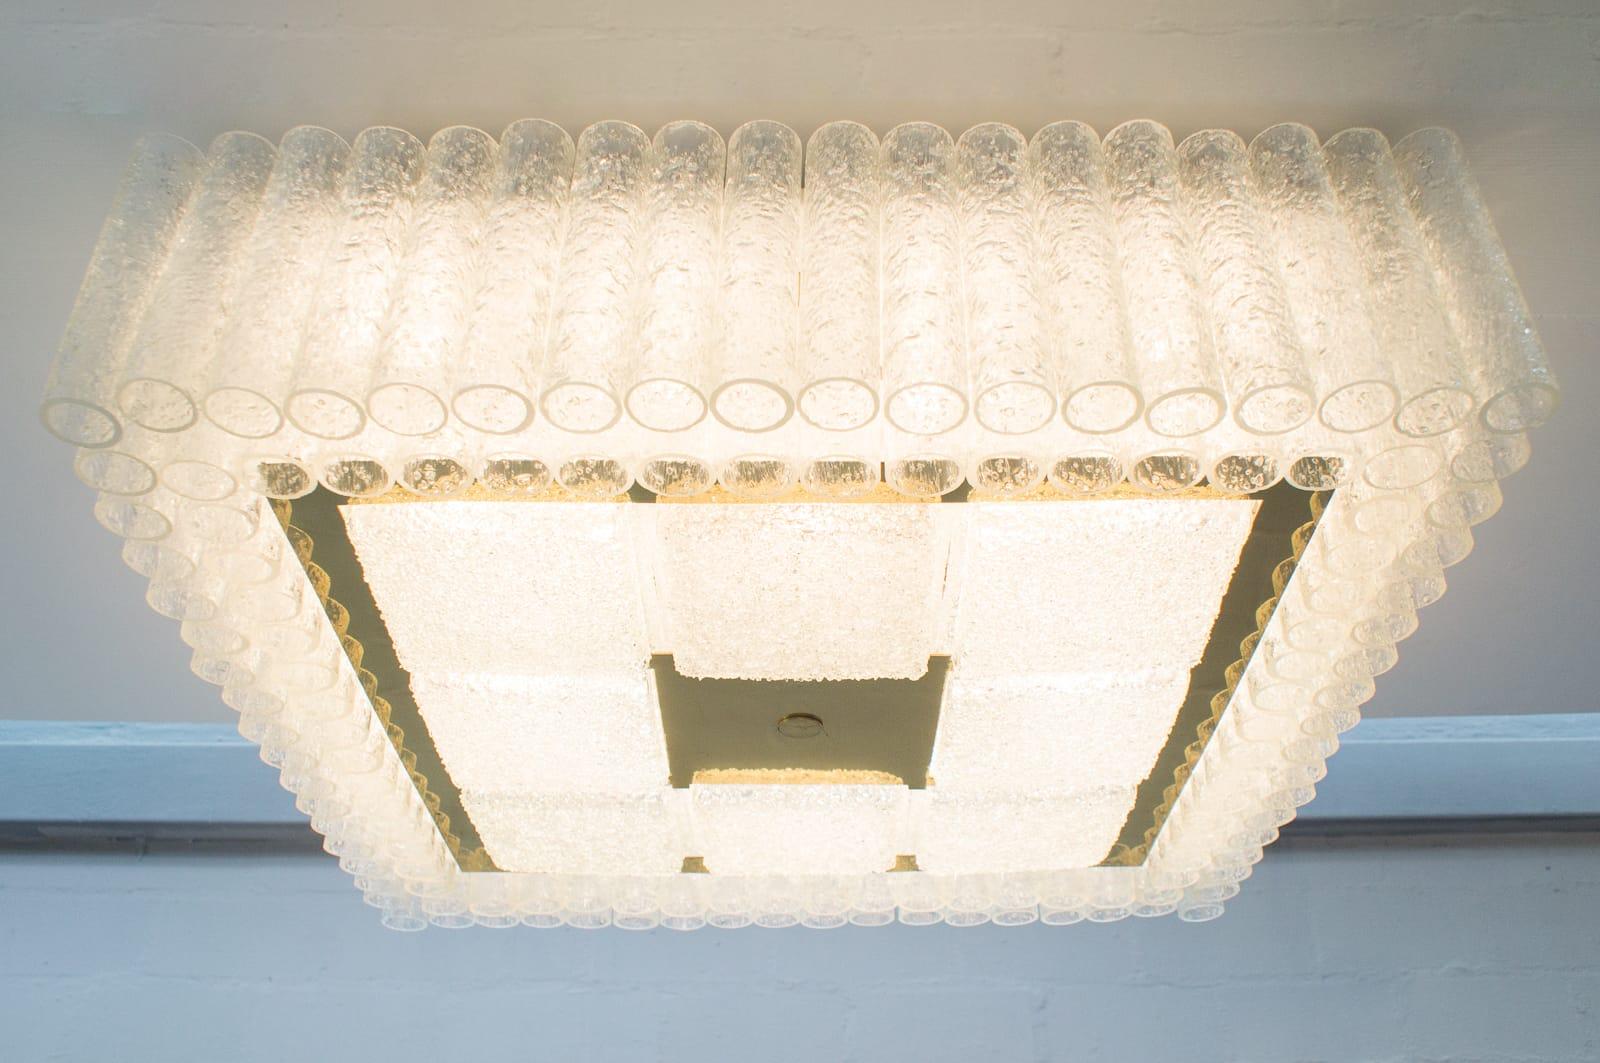 Large ceiling lamp from Doria Leuchten.
Total of 132 glass tubes and 8 square glass pieces.
Requires 16 E27 bulbs.
     